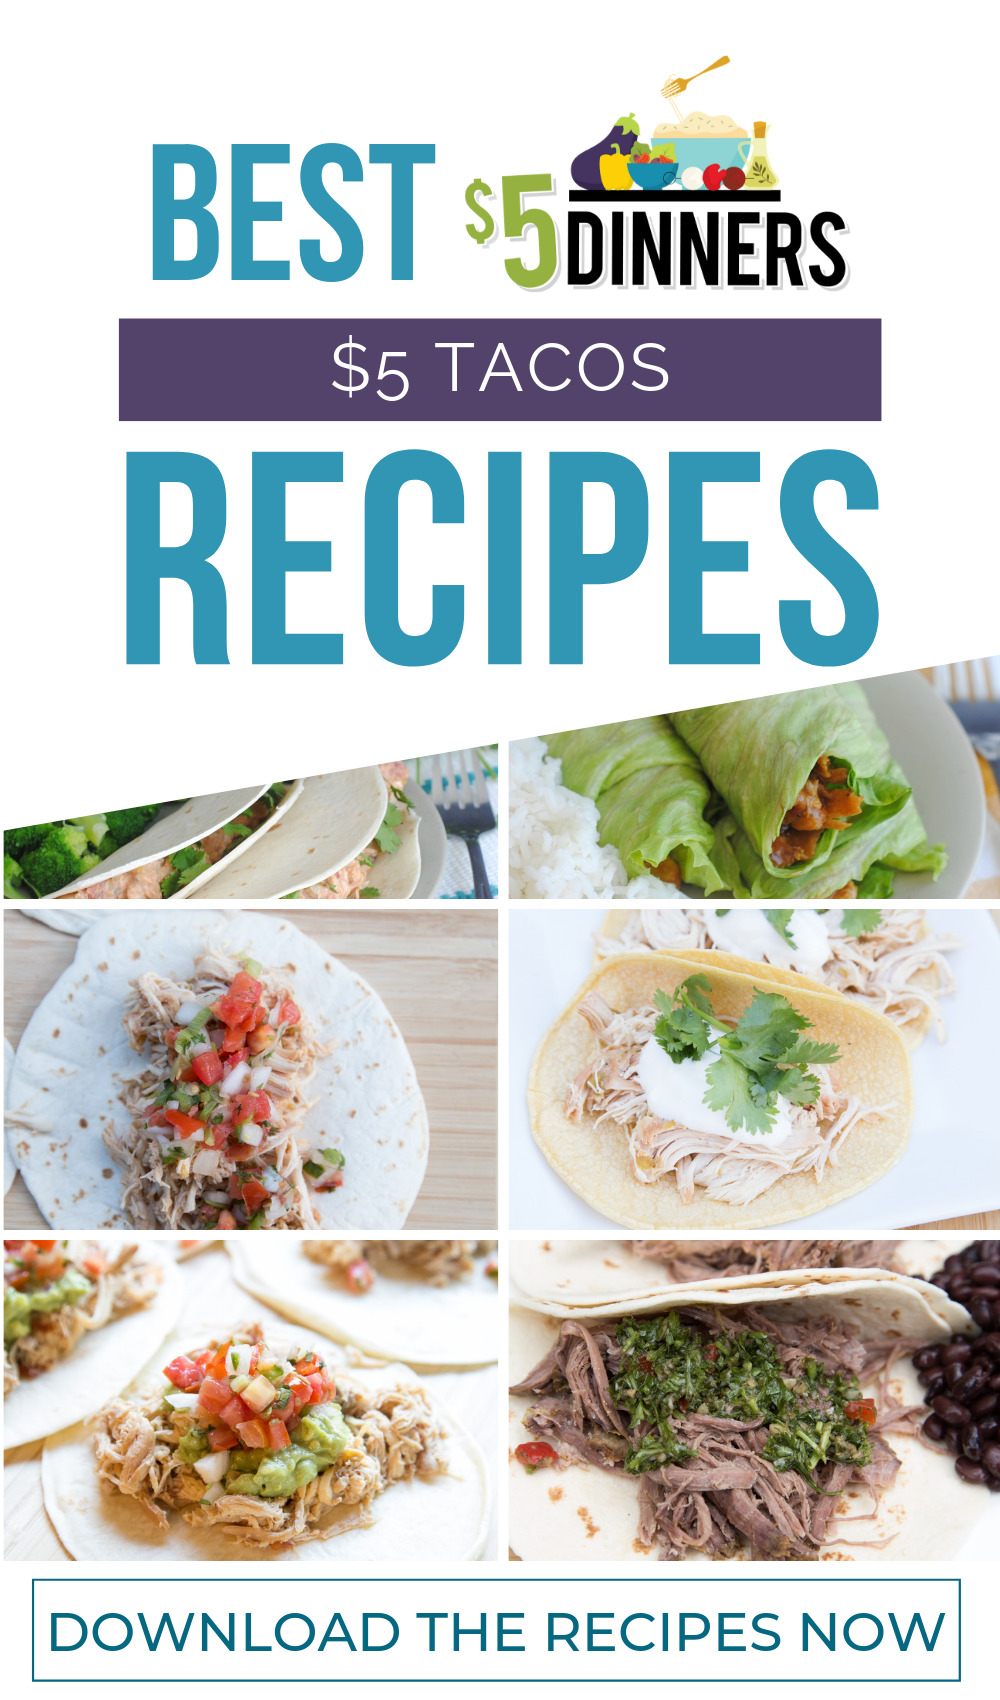 How to Make Simple Tacos for less than $5 - $5 Dinners